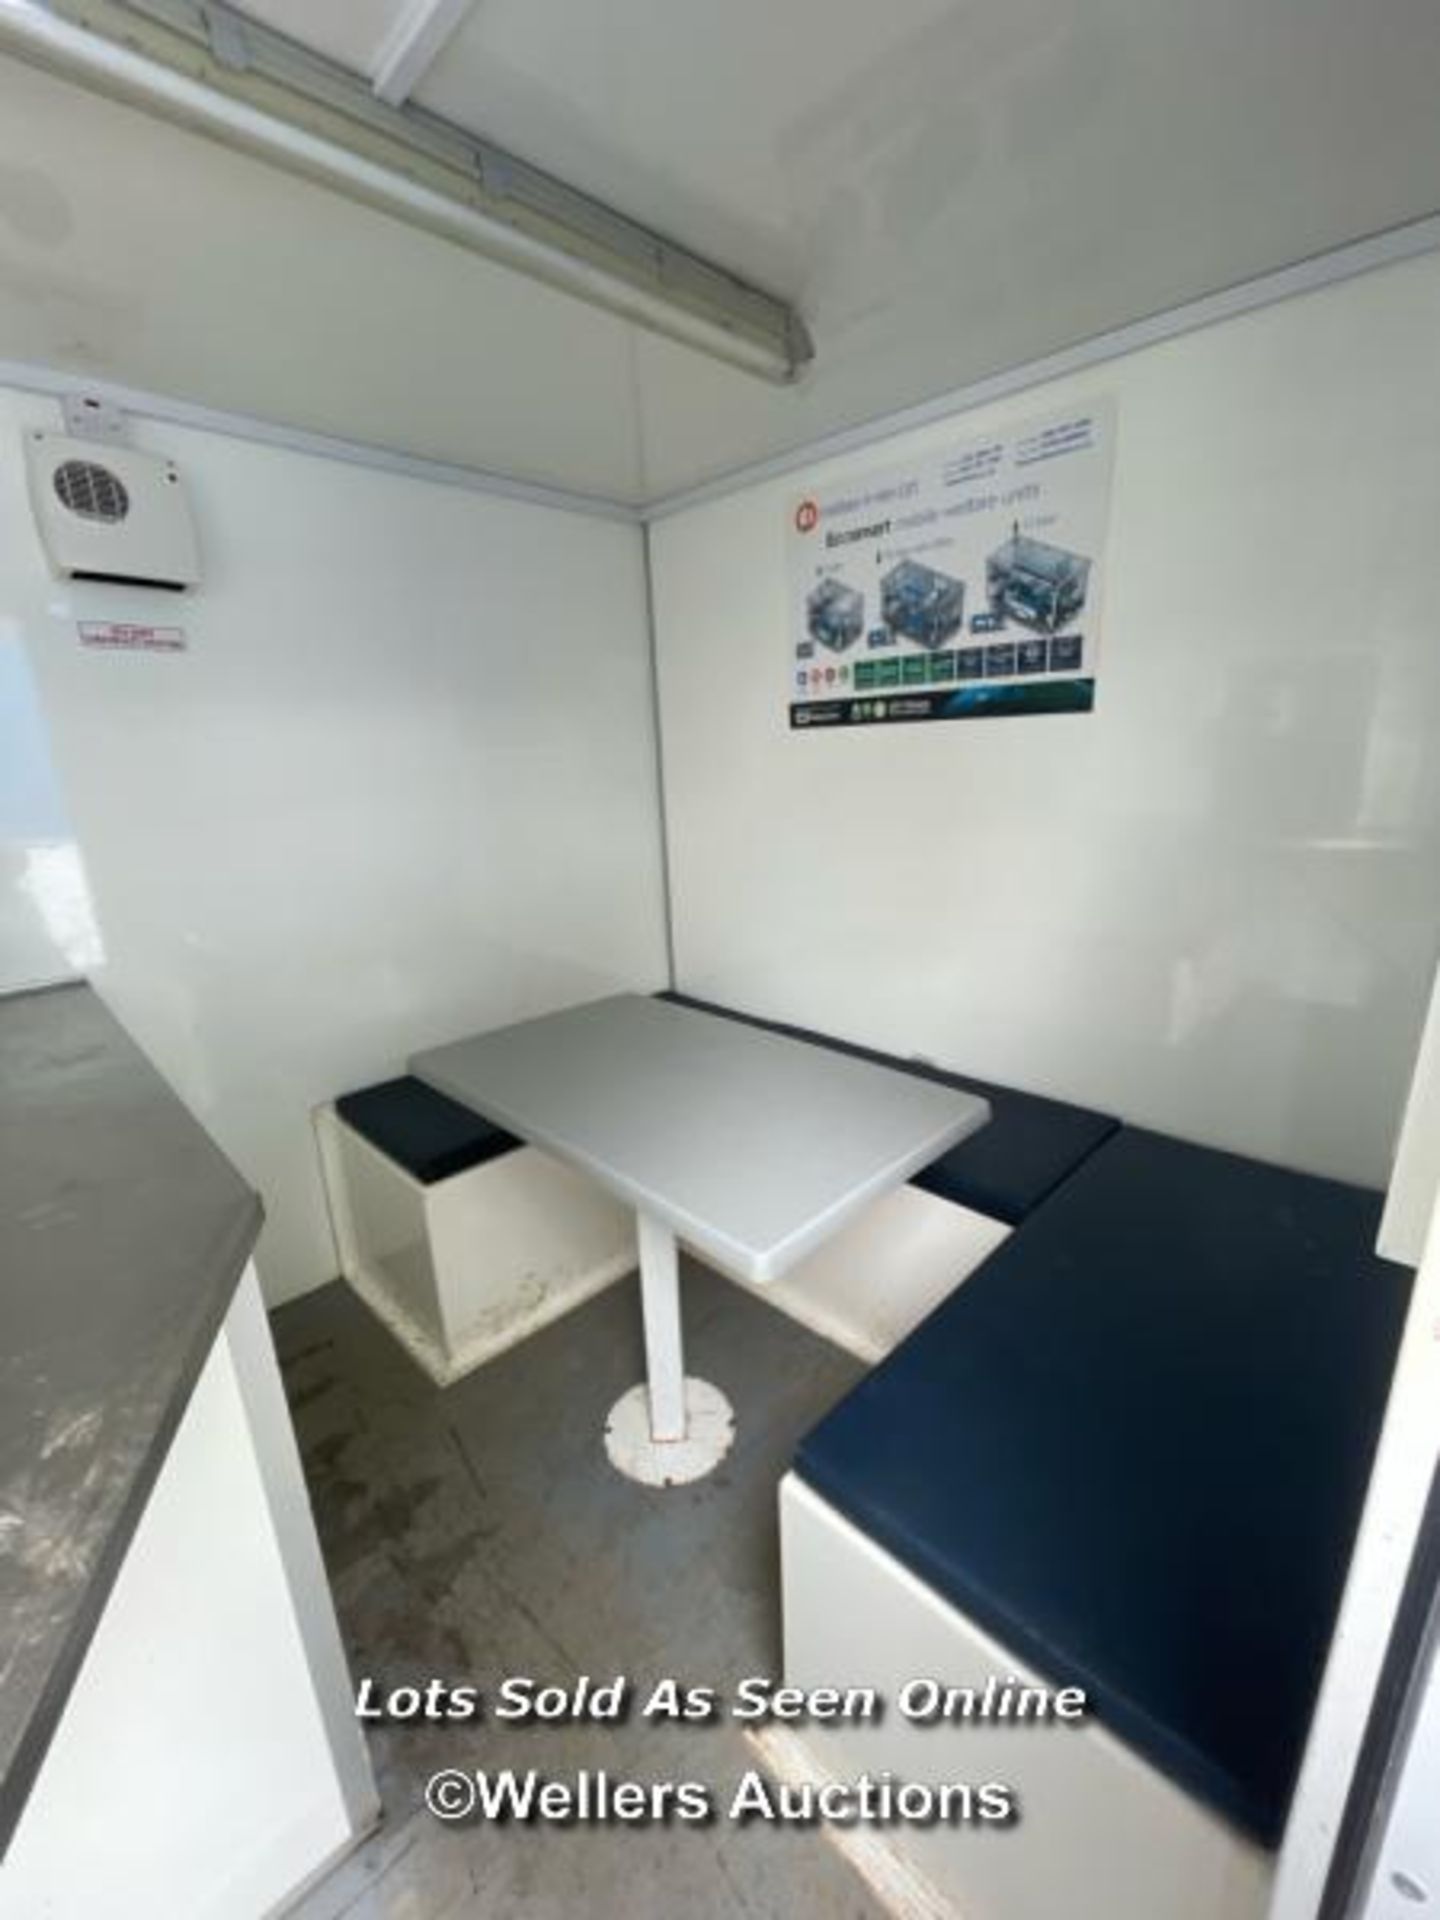 6 PERSON 12 X 7.5FT AJC EASY CABIN TOWABLE WELFARE UNIT, INCLUDES WASH BASIN, KETTLE, MICROWAVE, - Image 9 of 19